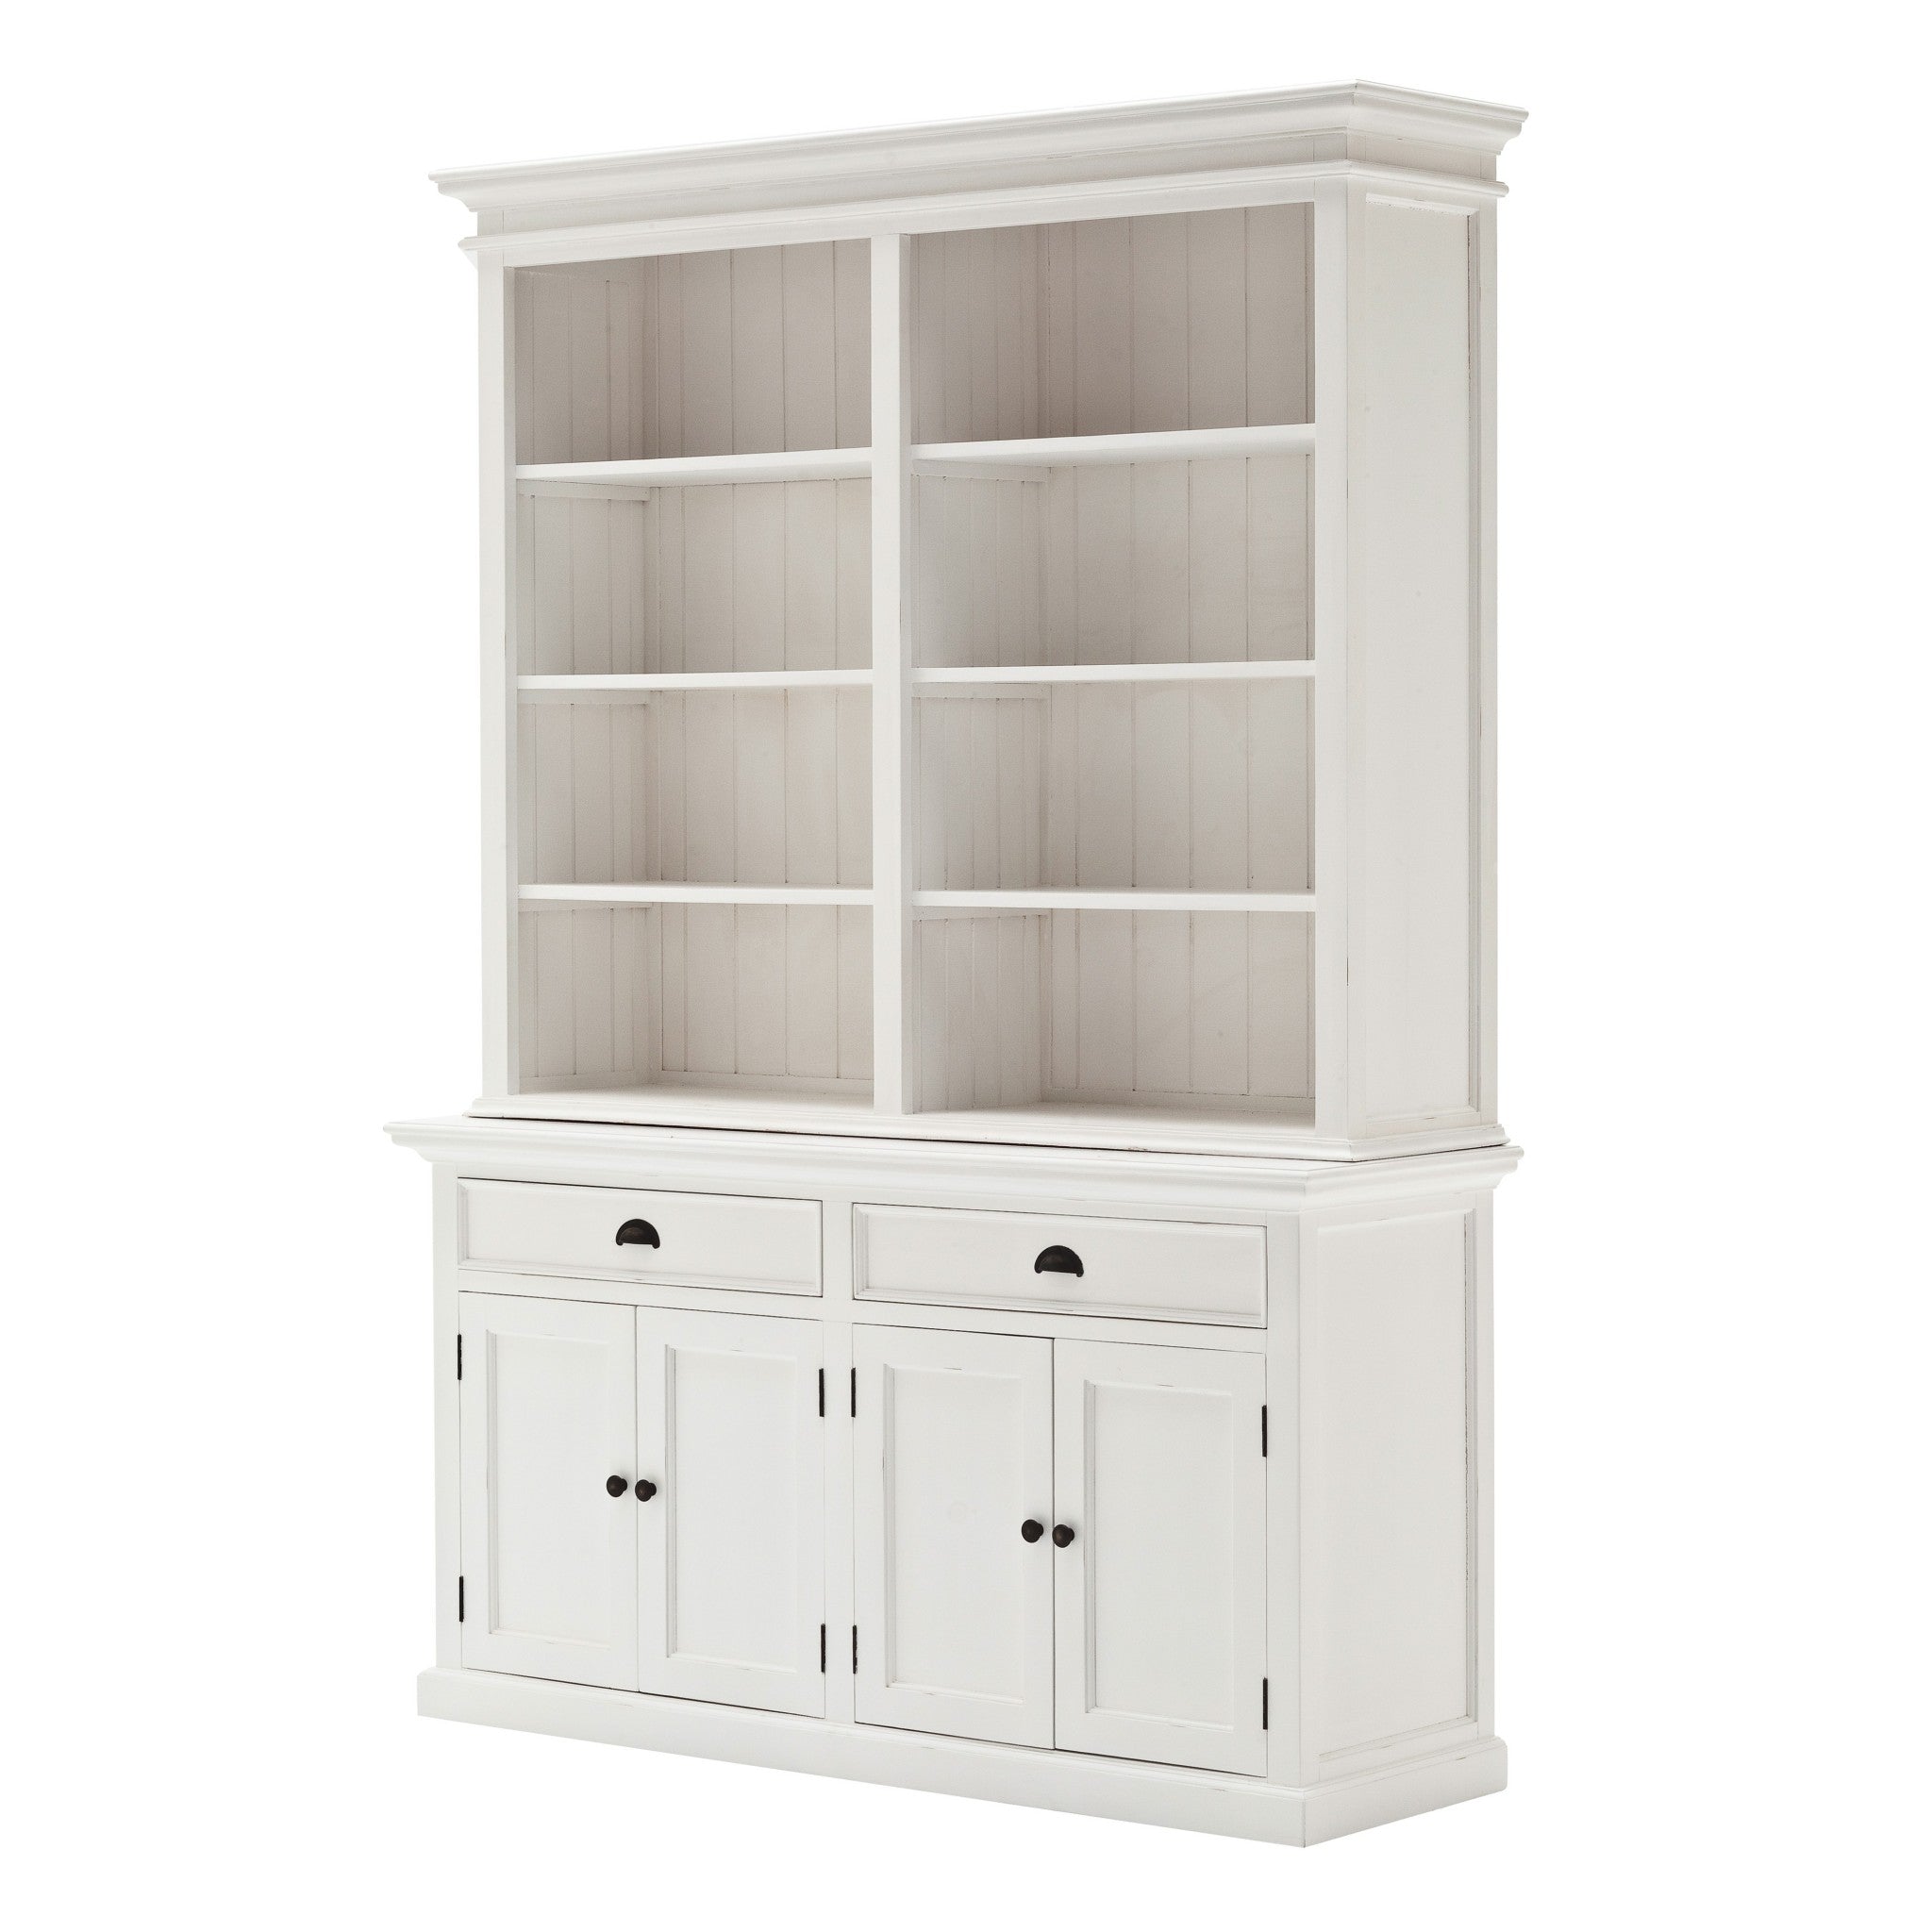 87" White Solid Wood Four Tier Bookcase